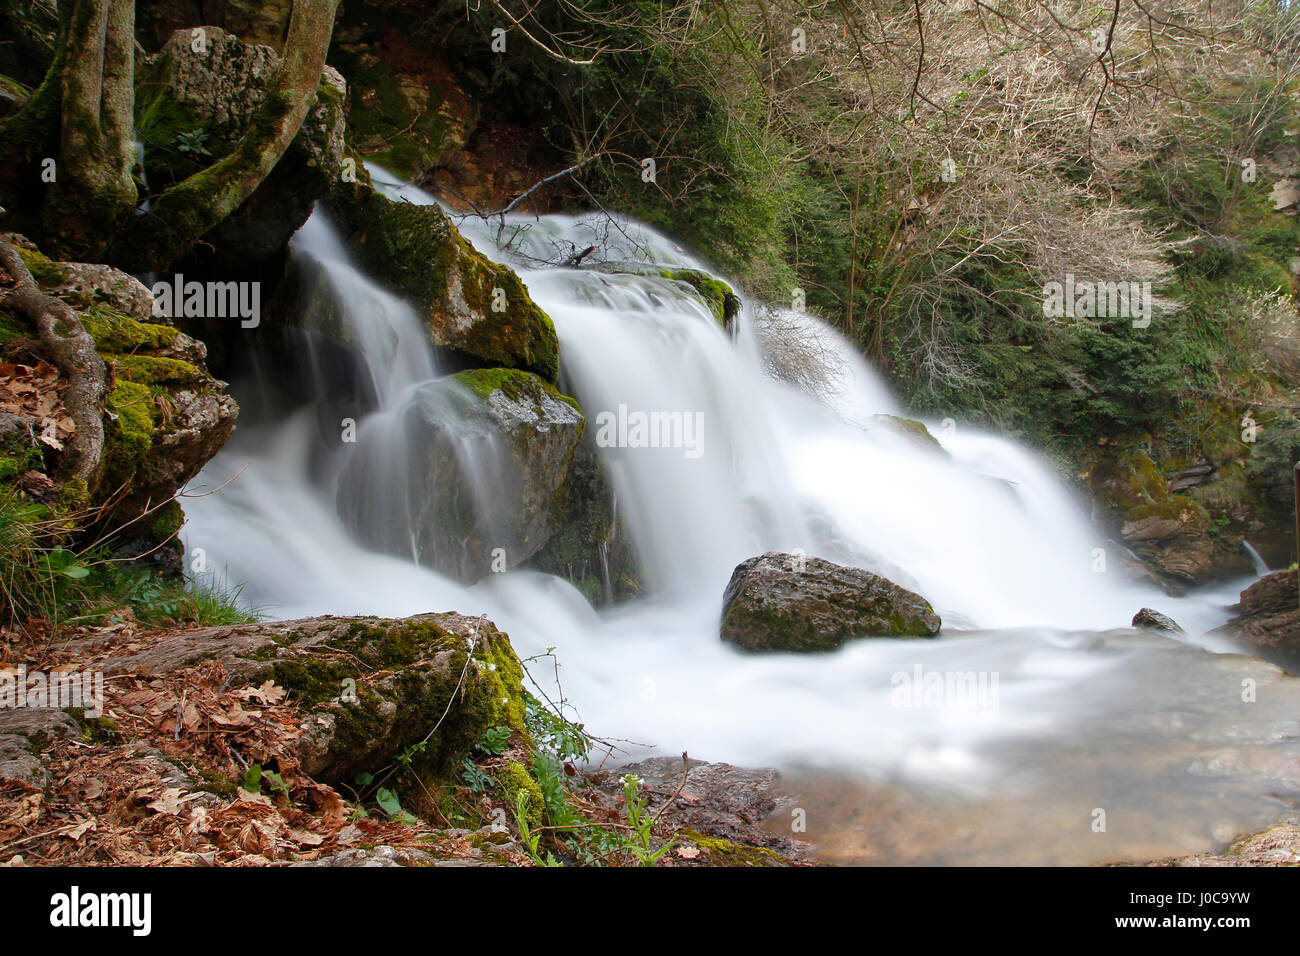 Waterfall in a river, in a long exposure shot Stock Photo